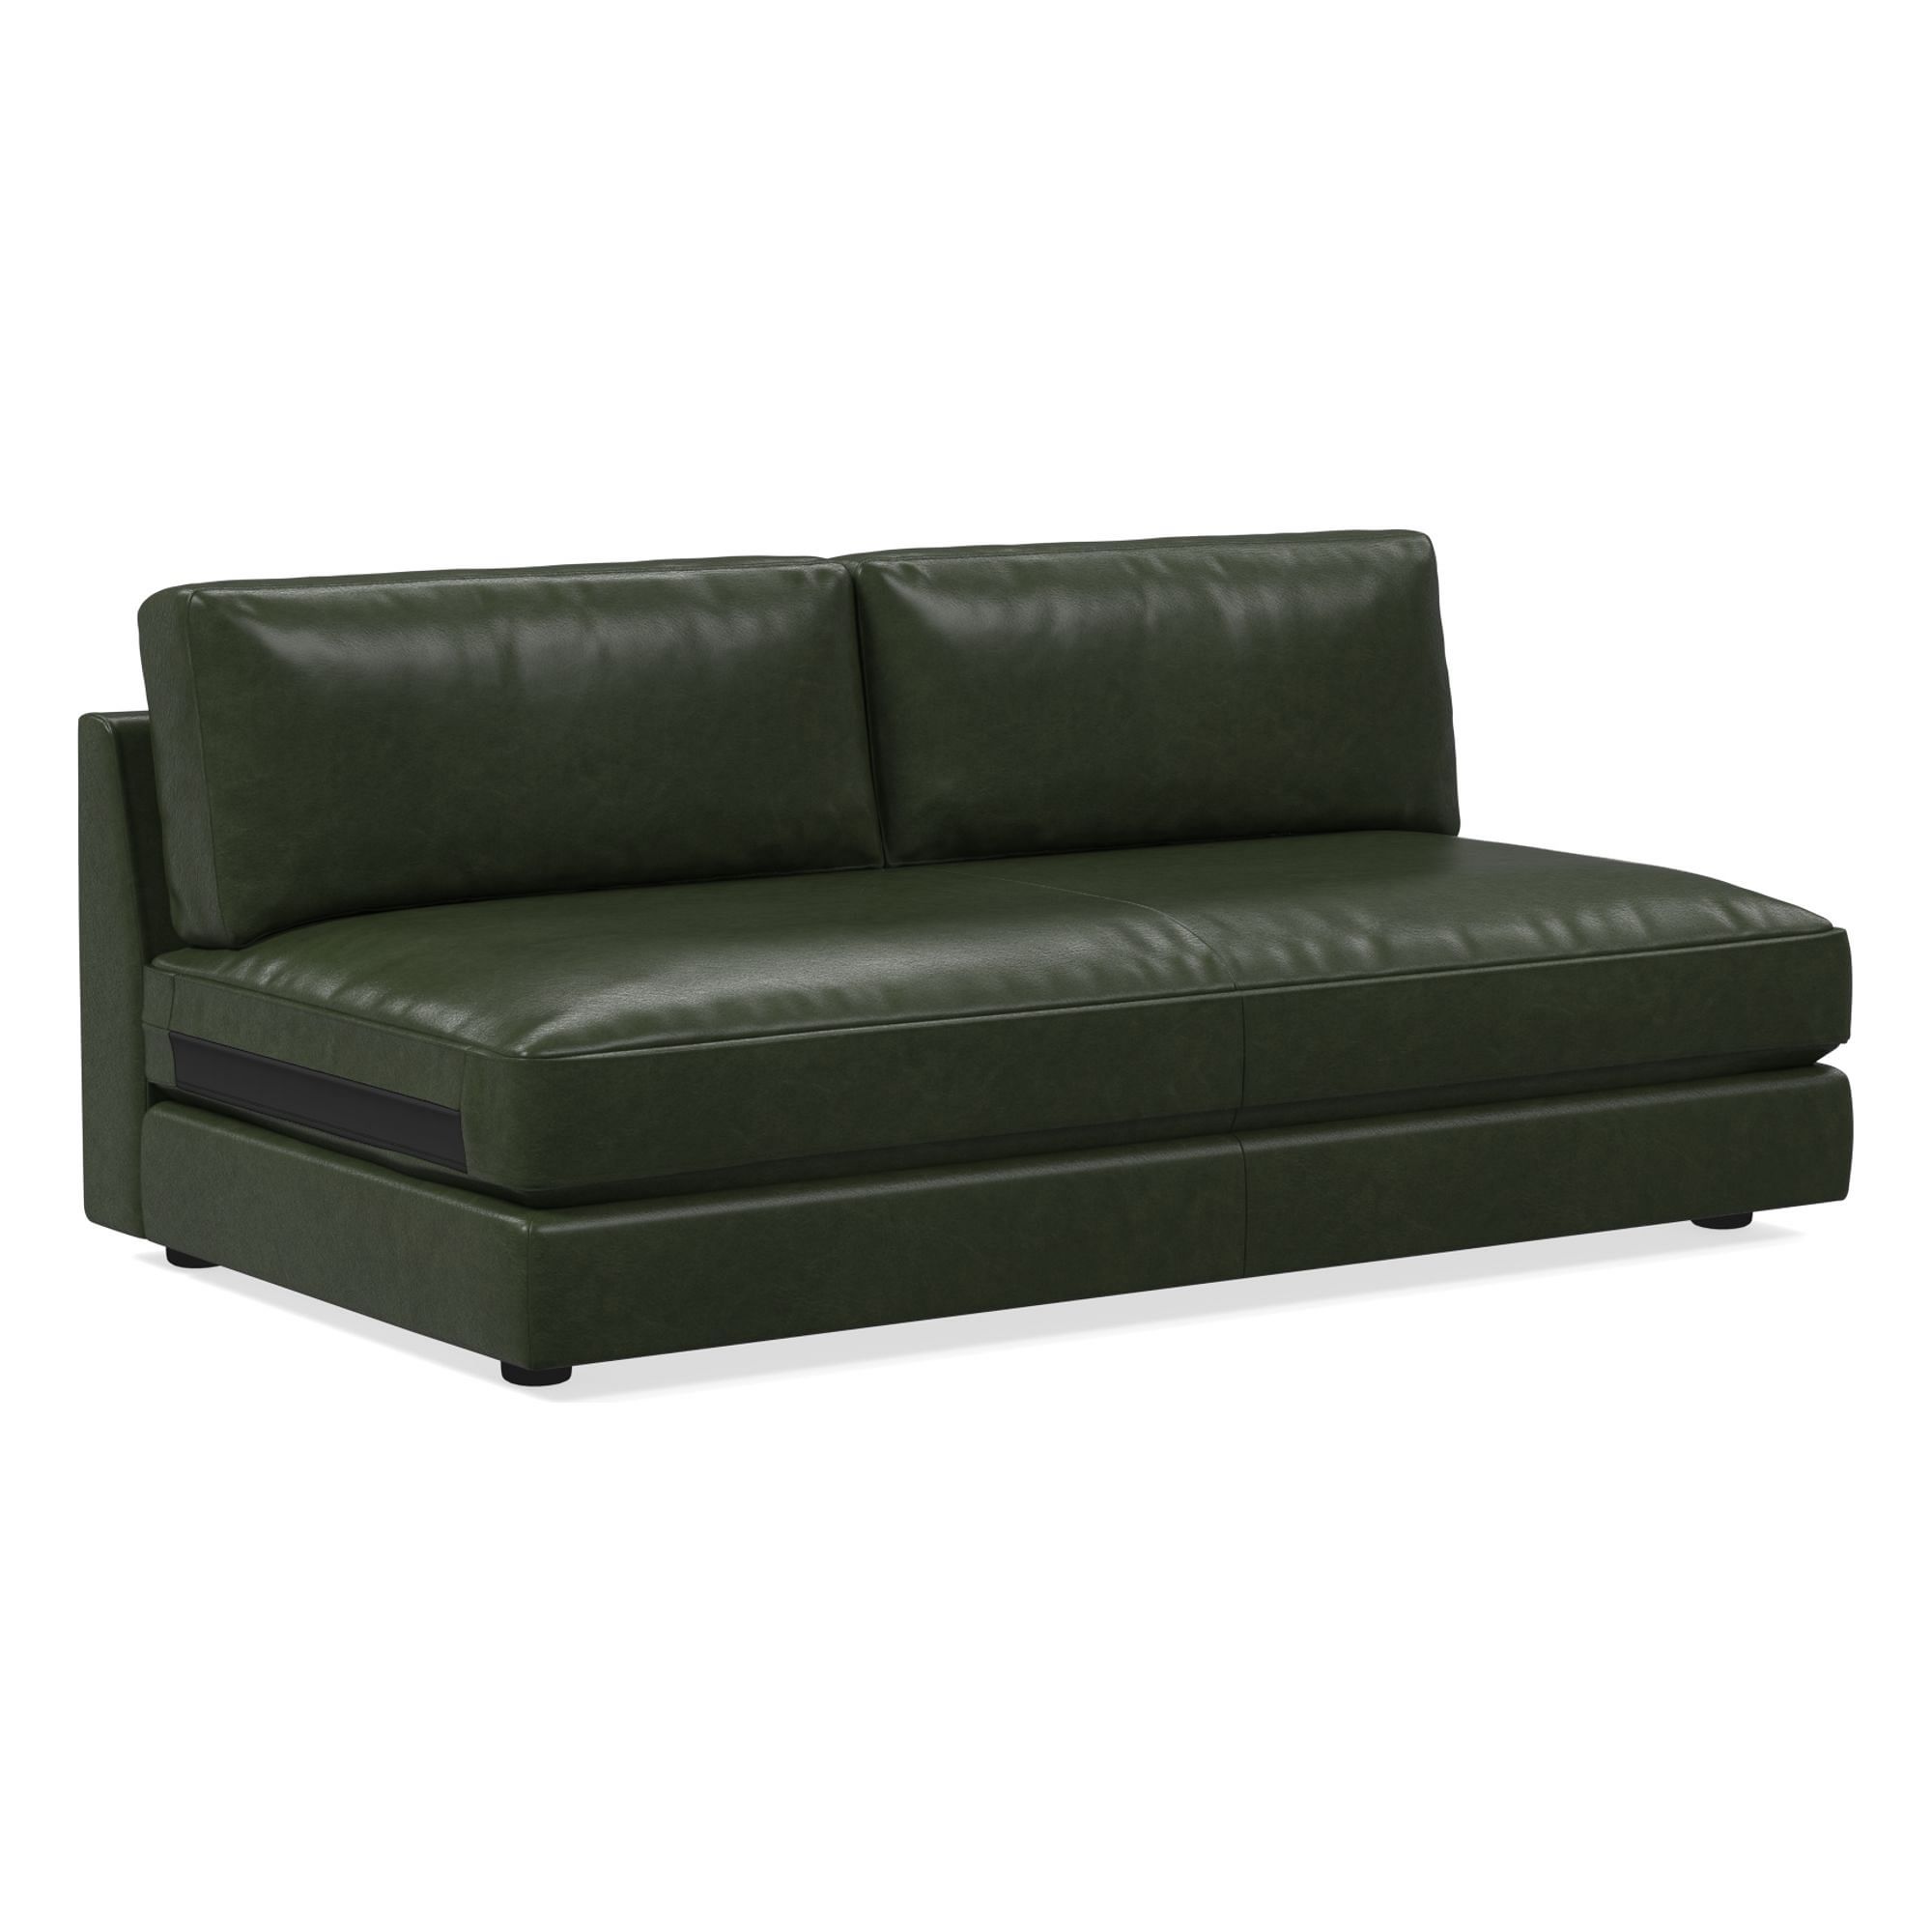 Build Your Own - Haven Leather Sectional | West Elm